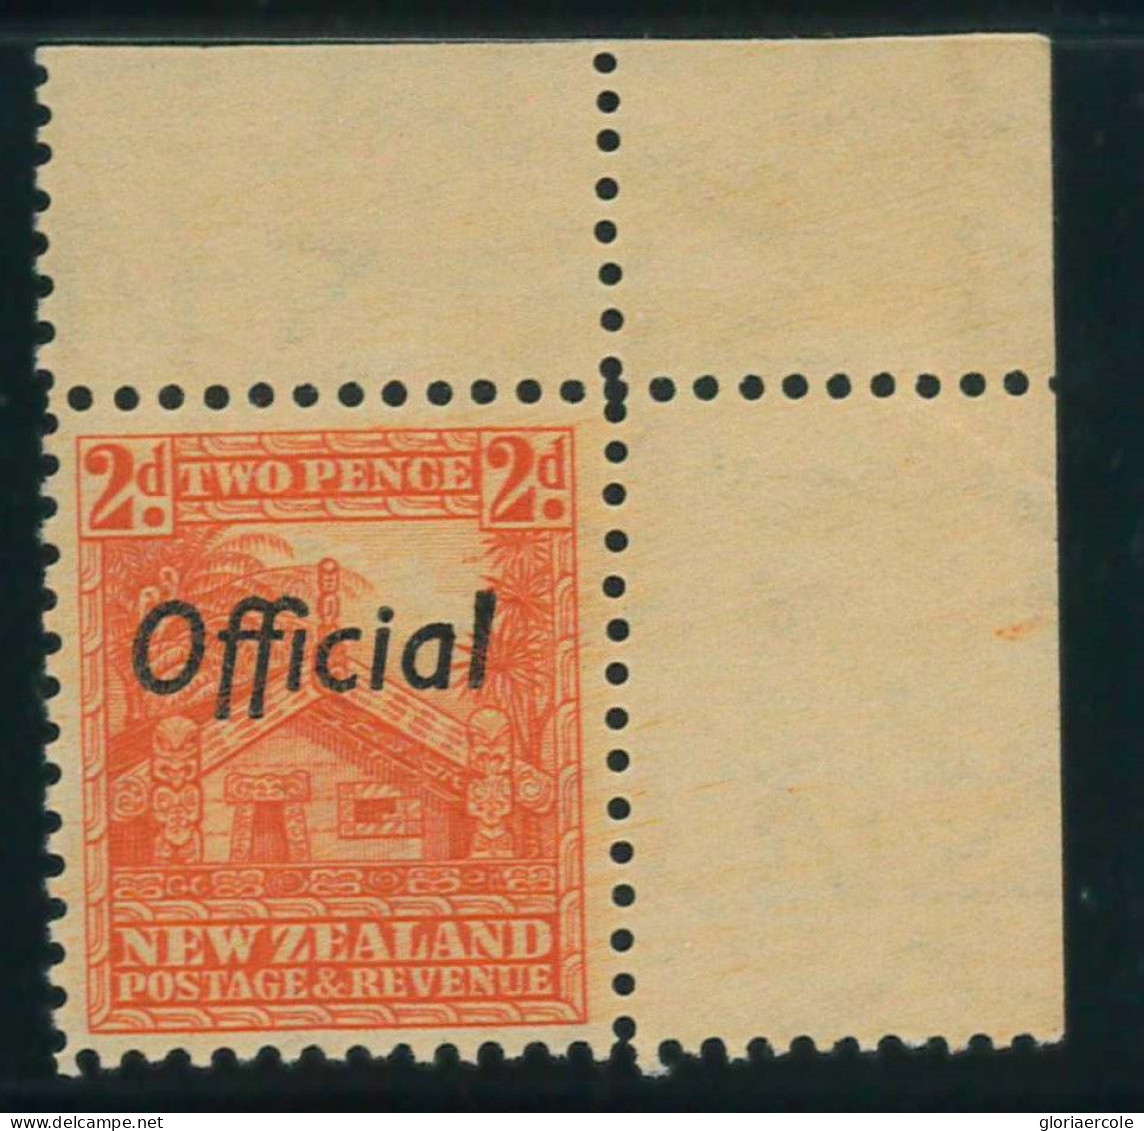 P3081 C - NEW ZEALAND, OFFICIAL STAMP S.GIBBONS, 0123 B MNH - Service